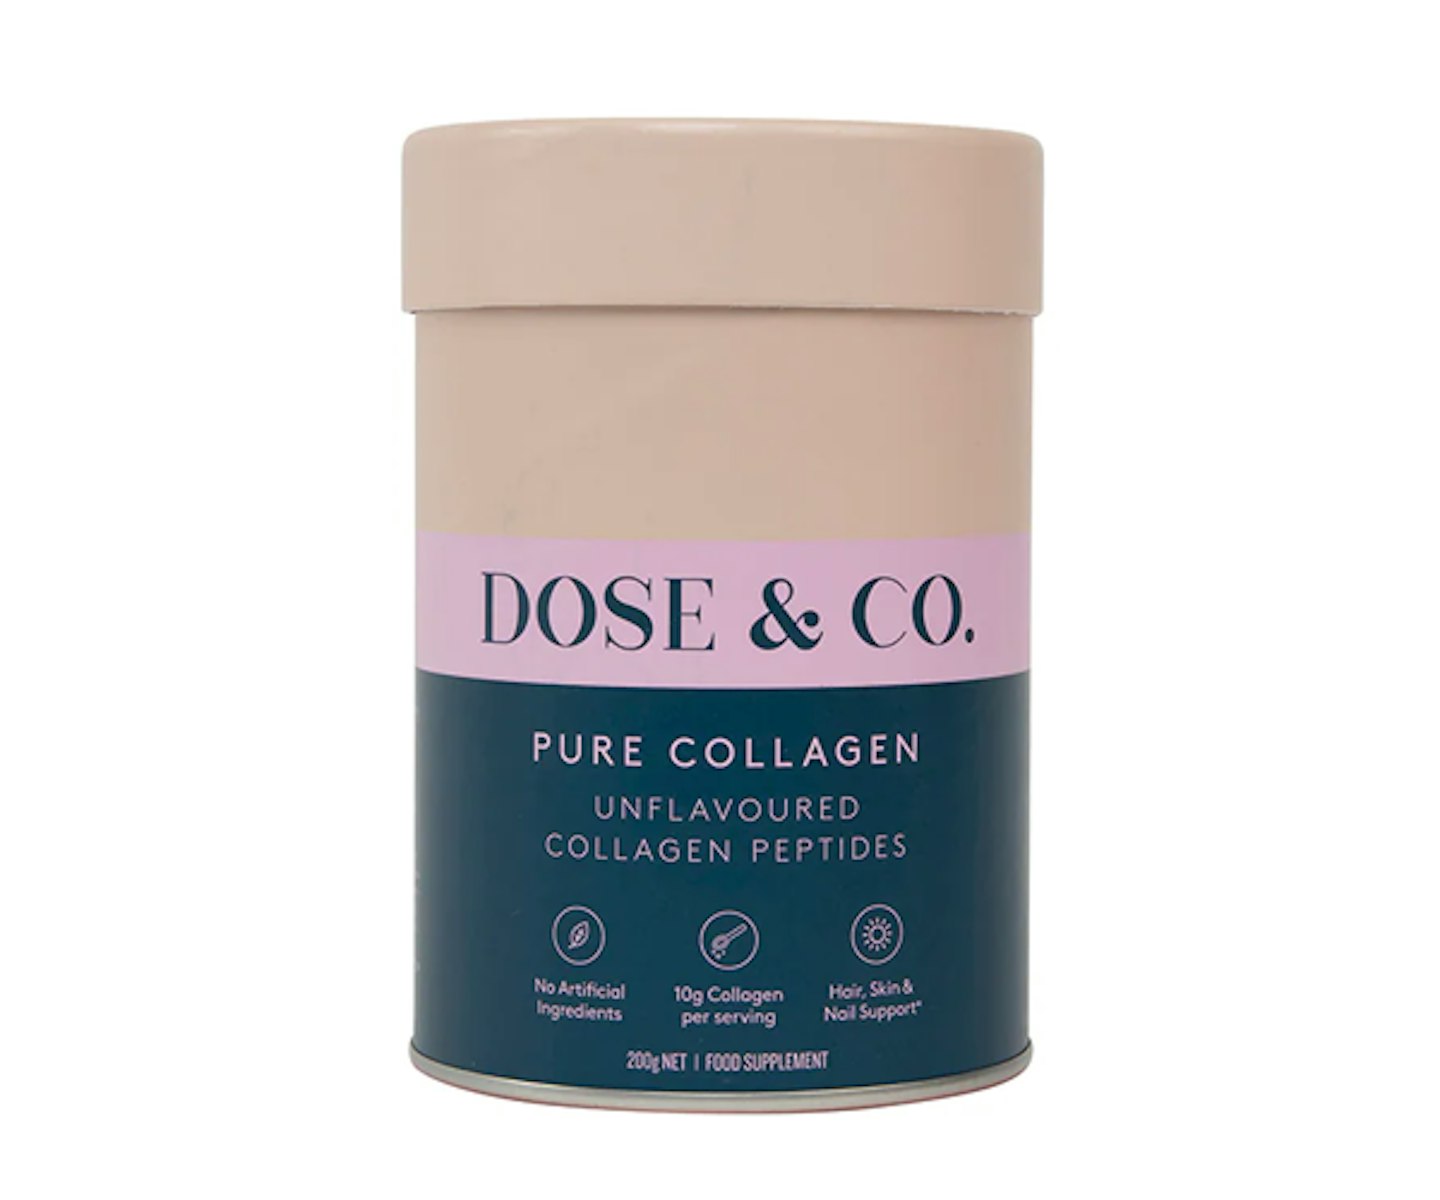 Dose & Co Collagen Peptides Unflavoured 200g, £26.99